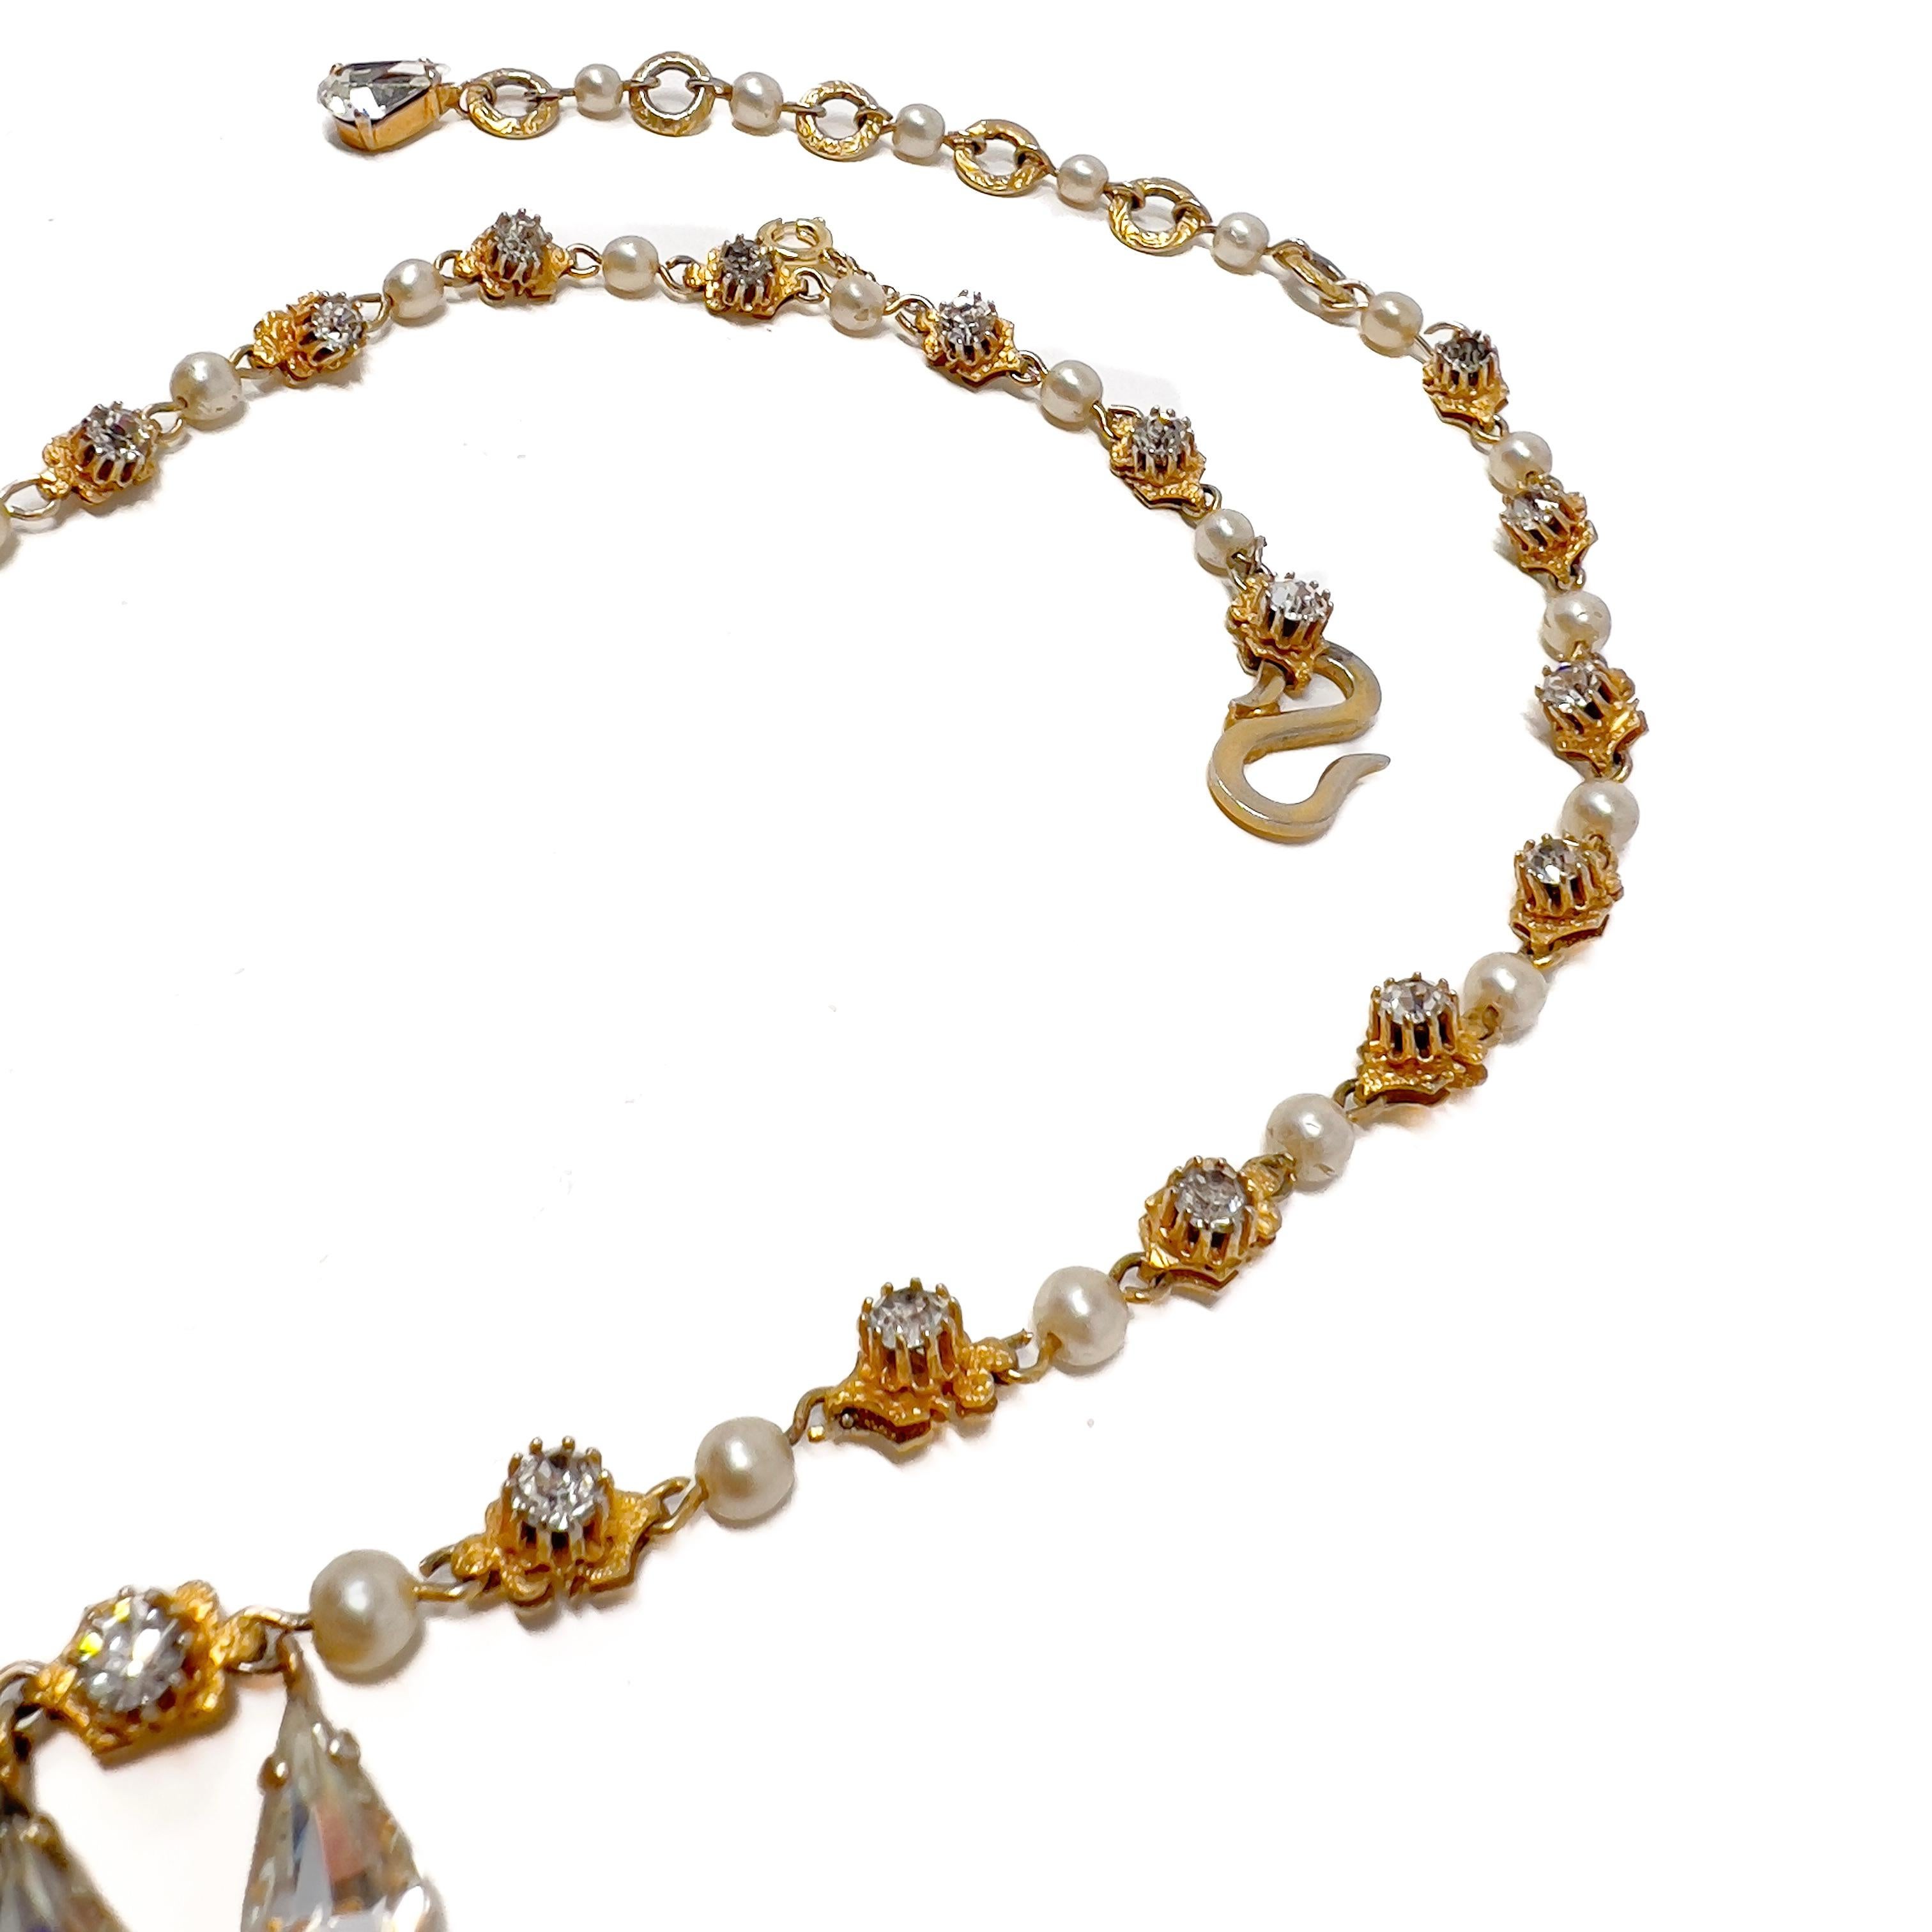 Christian Dior by Mitchel Maer 1952-1956 Vintage Rhinestone and Pearl Necklace For Sale 3